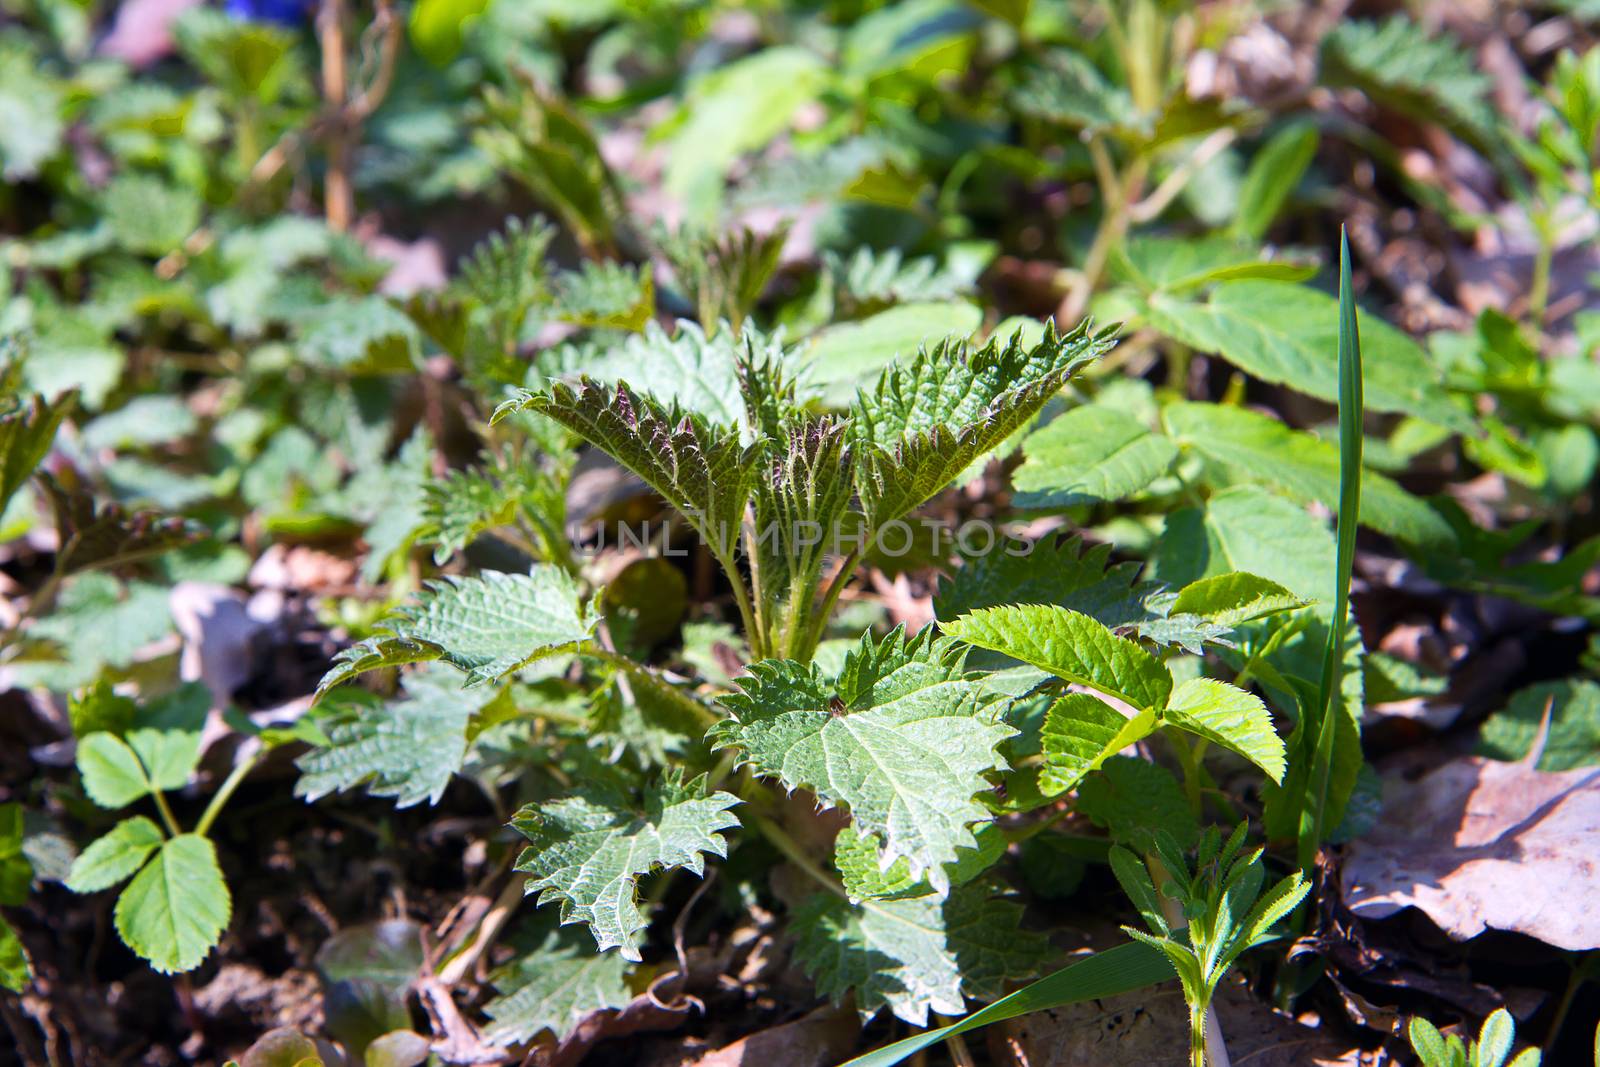 Nettle plant closeup in the forest.